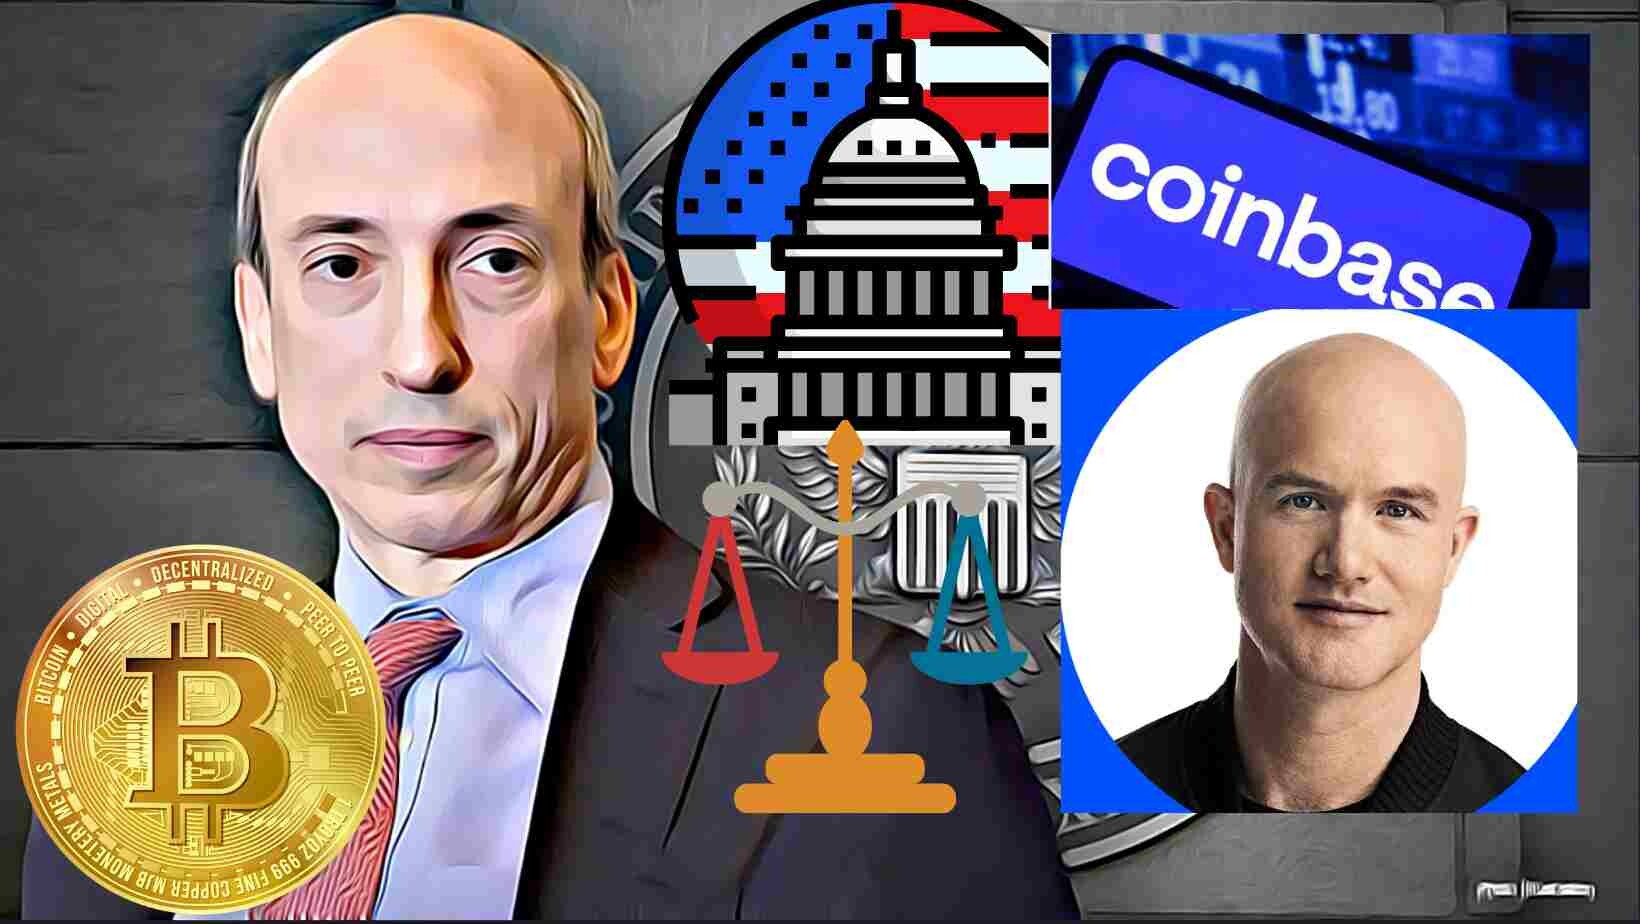 CRYPTONEWSBYTES.COM coinbase-SEC- SEC's Sues Coinbase Over Alleged Securities Violations, stock drops over 21% Premarket - A day after SEC sues Binance  